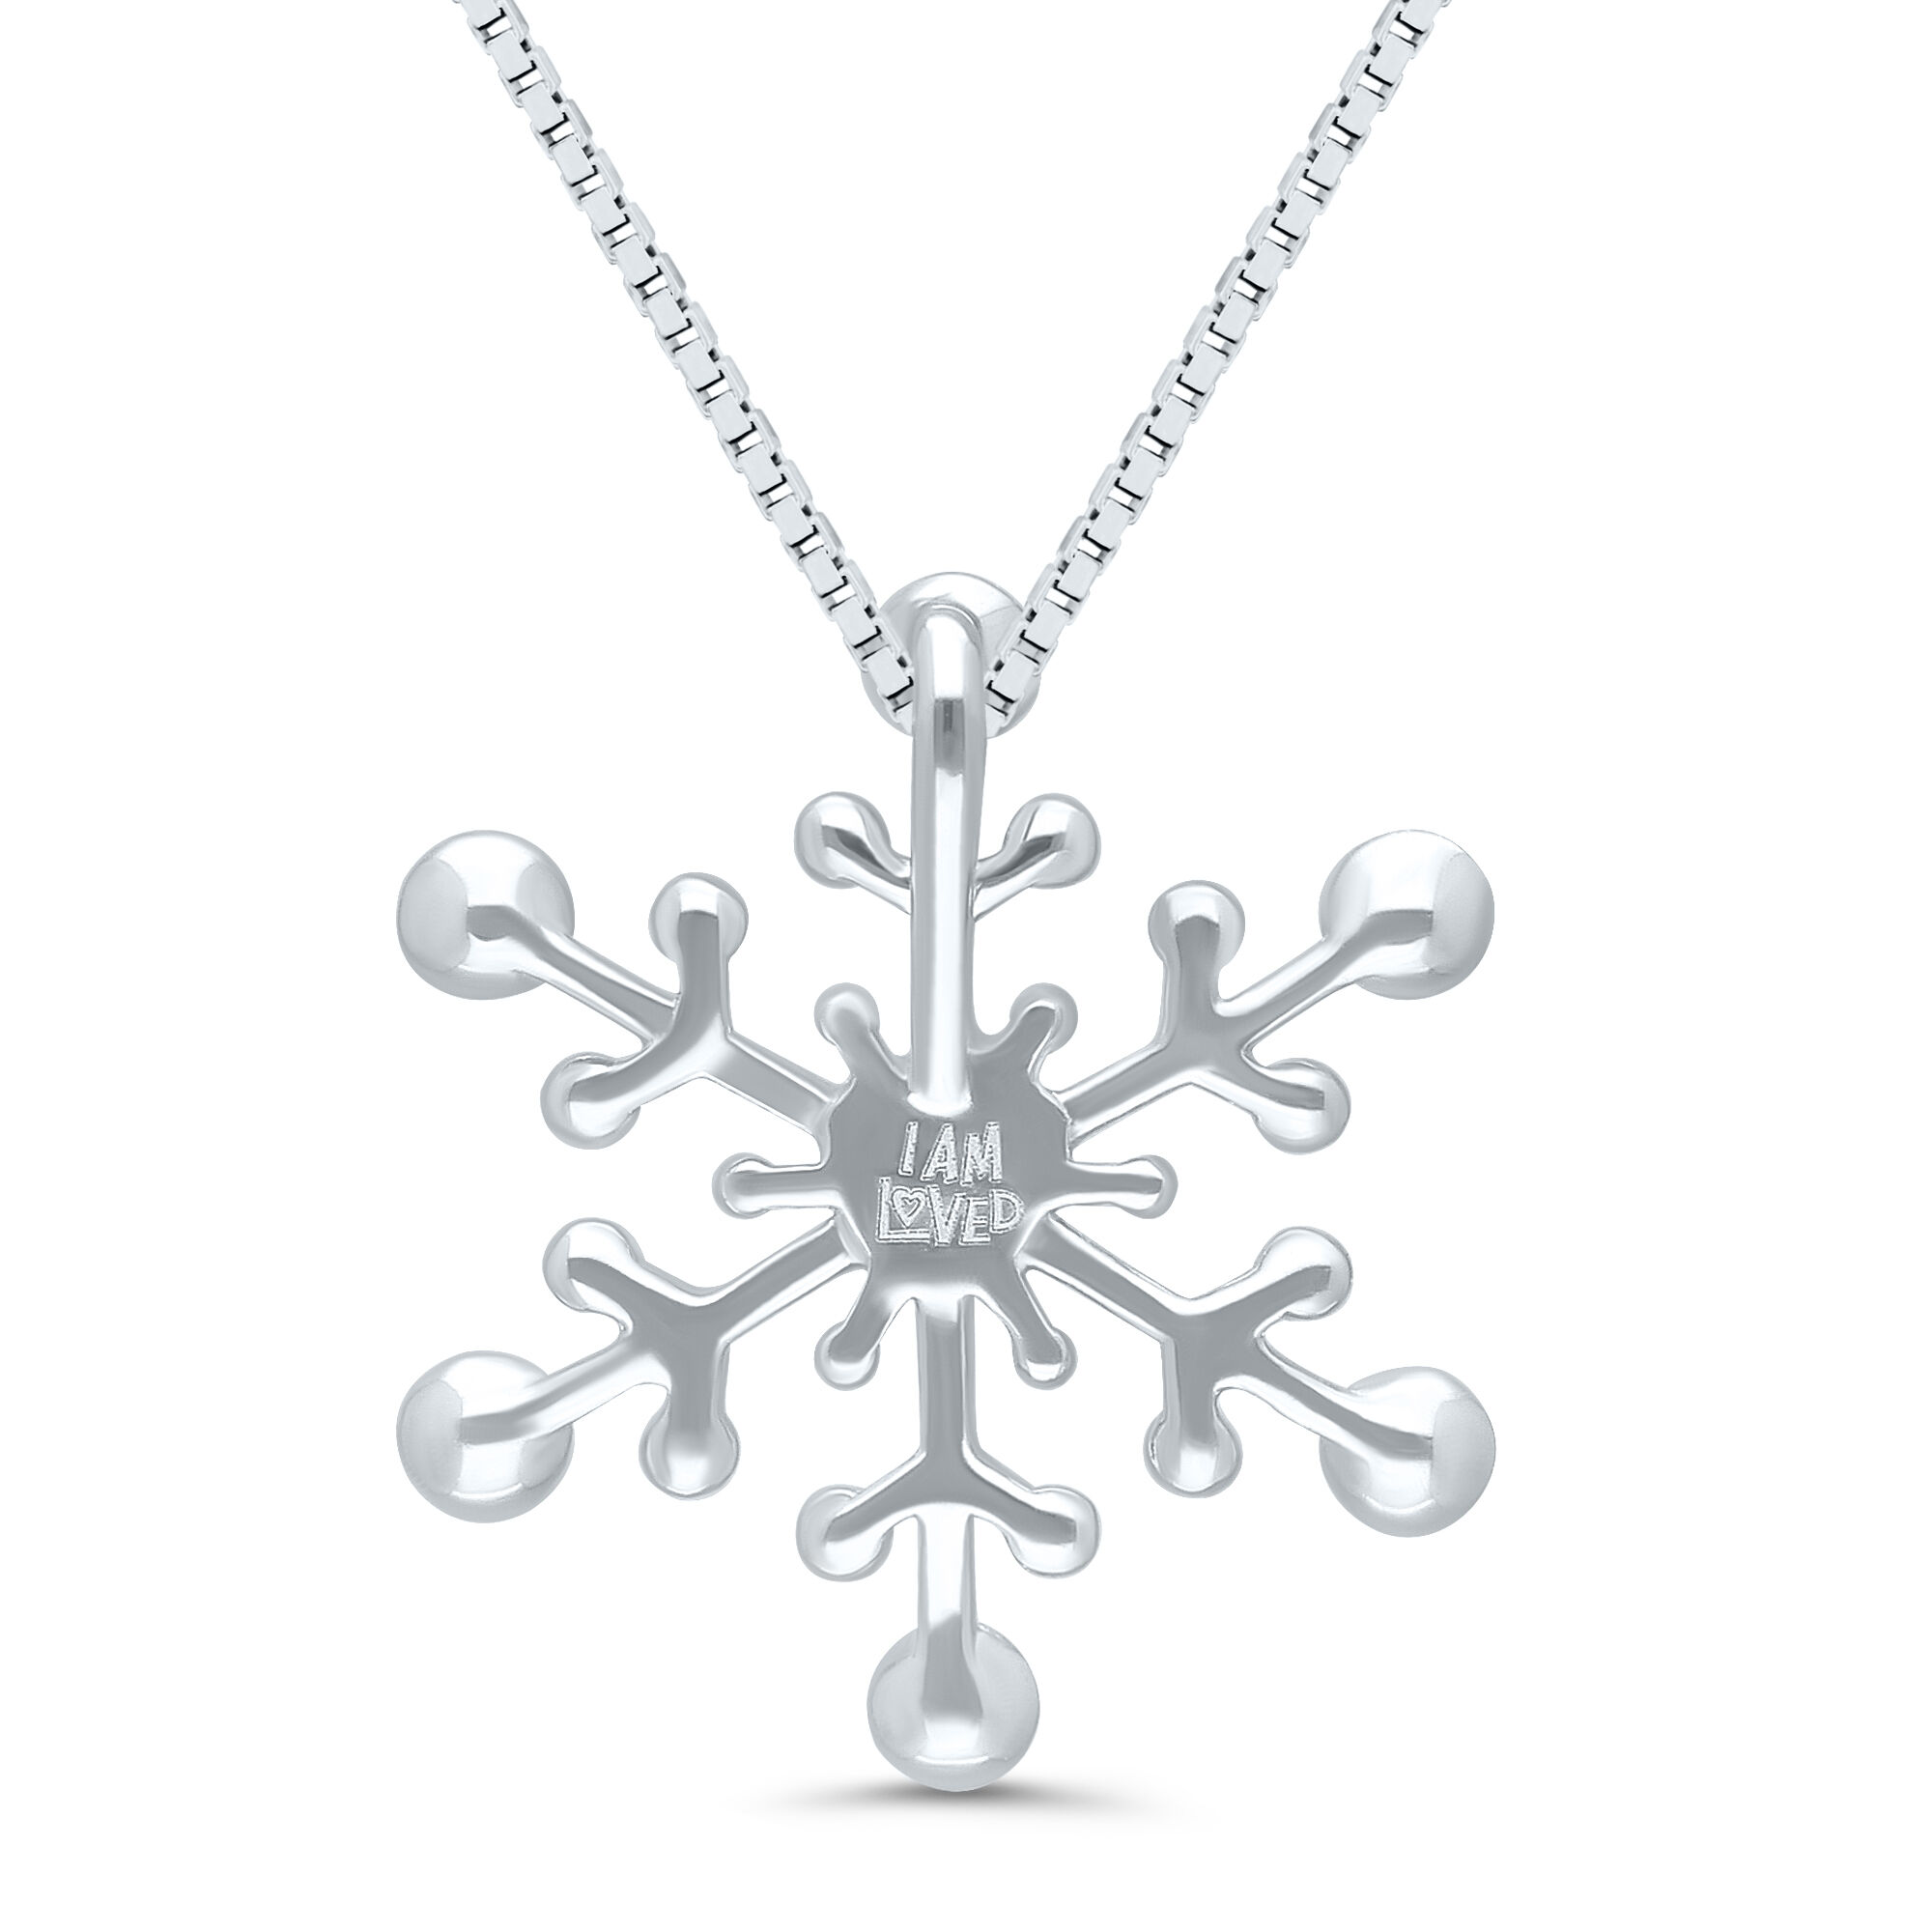 Buy White Swarovski Crystal Snowflake Necklace, Silver Snowflake Pendant  20mm 4/5 With Zirconia, Dainty Snowflake Charm, 925 Sterling Silver Online  in India - Etsy